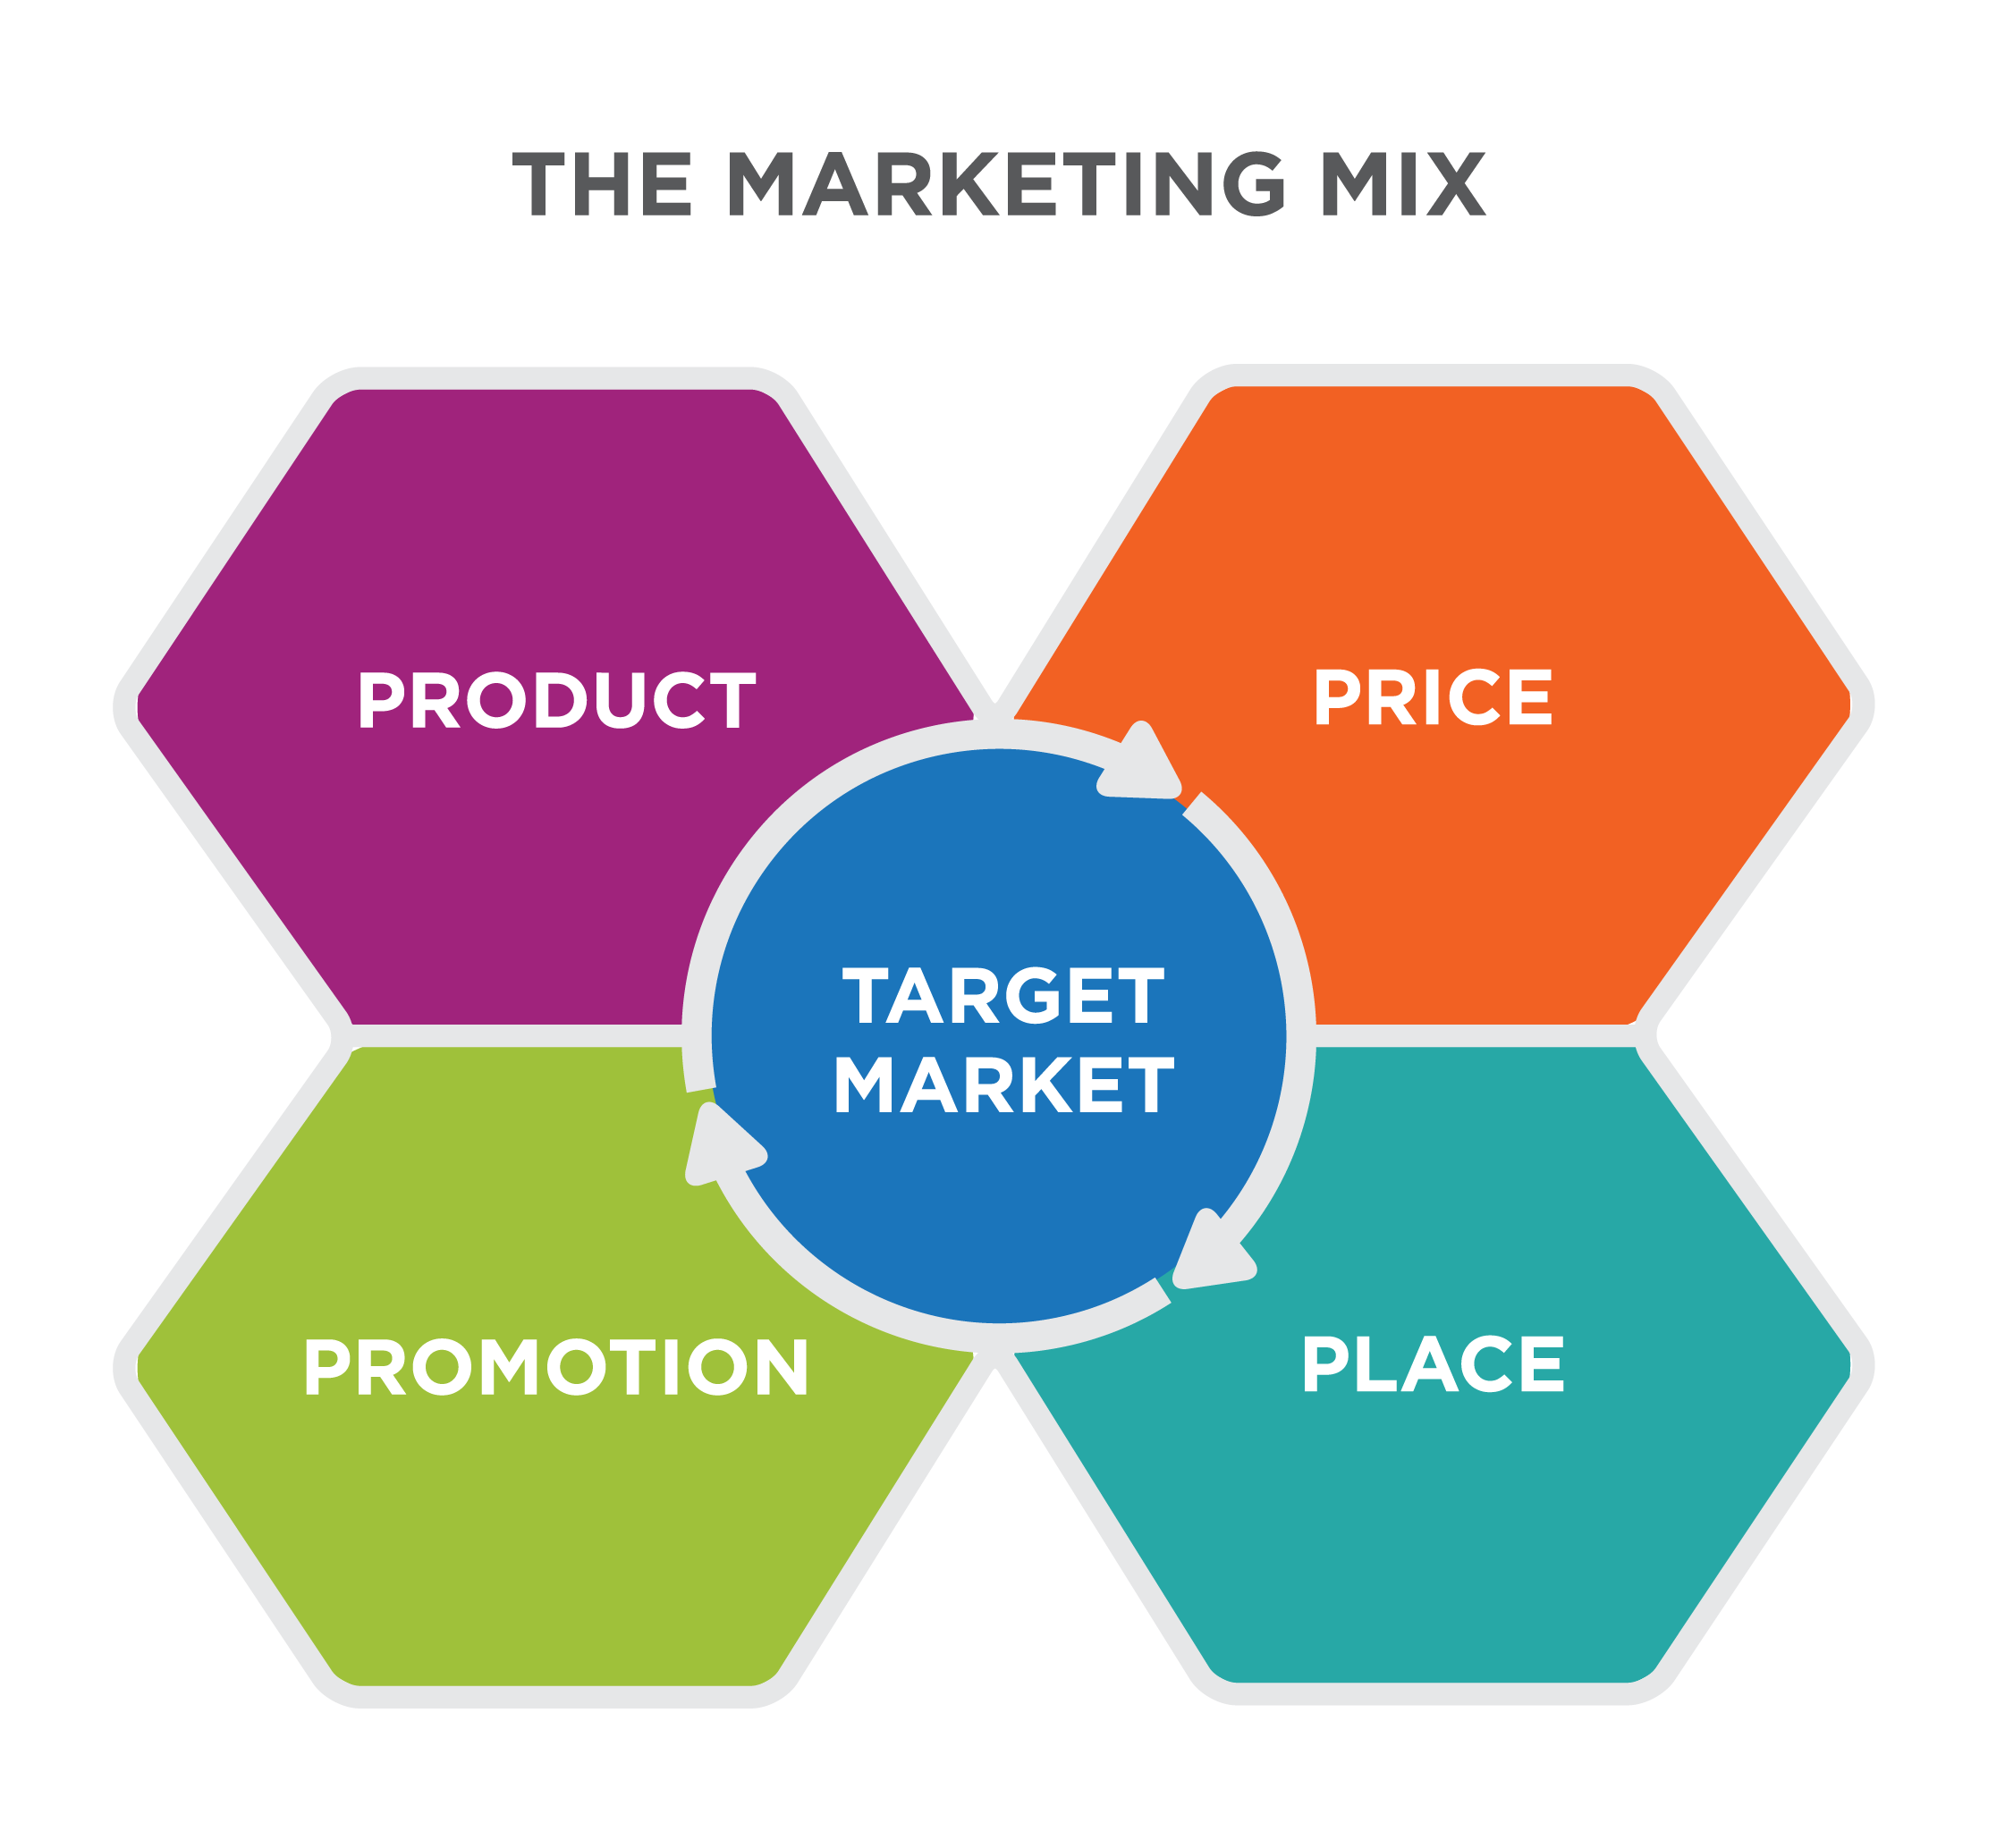 The Marketing Mix. Target market is surrounded by the 4 Ps: Product, Price, Promotion, and Place.